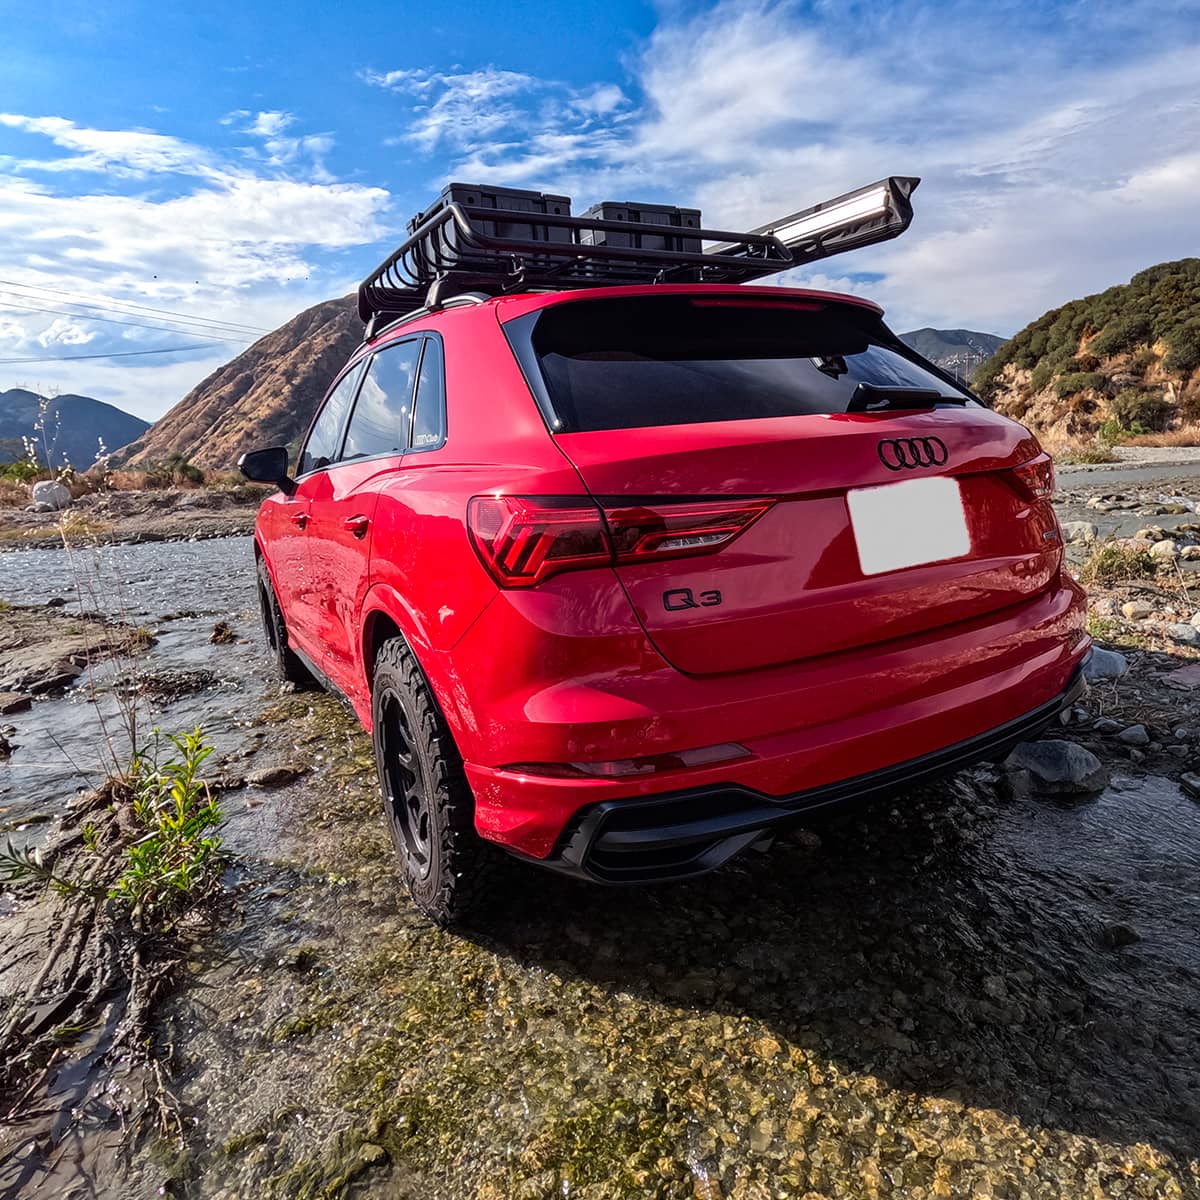 Red 2022 Audi Q3 S-line offroading in the dirt